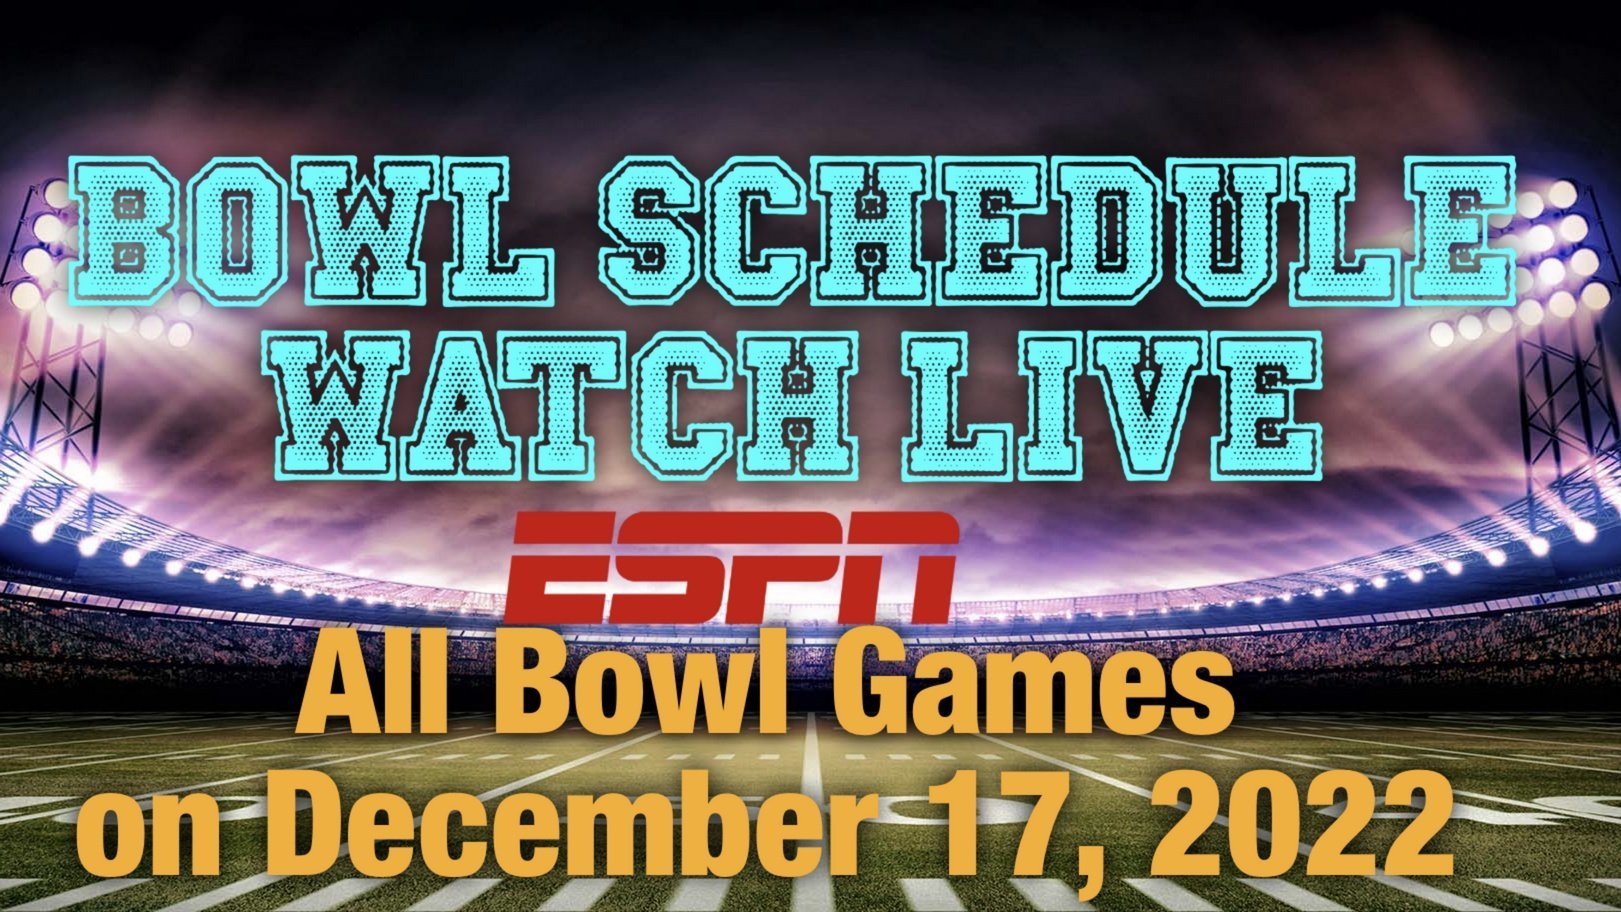 The 2022 College Football Bowl Schedule Today